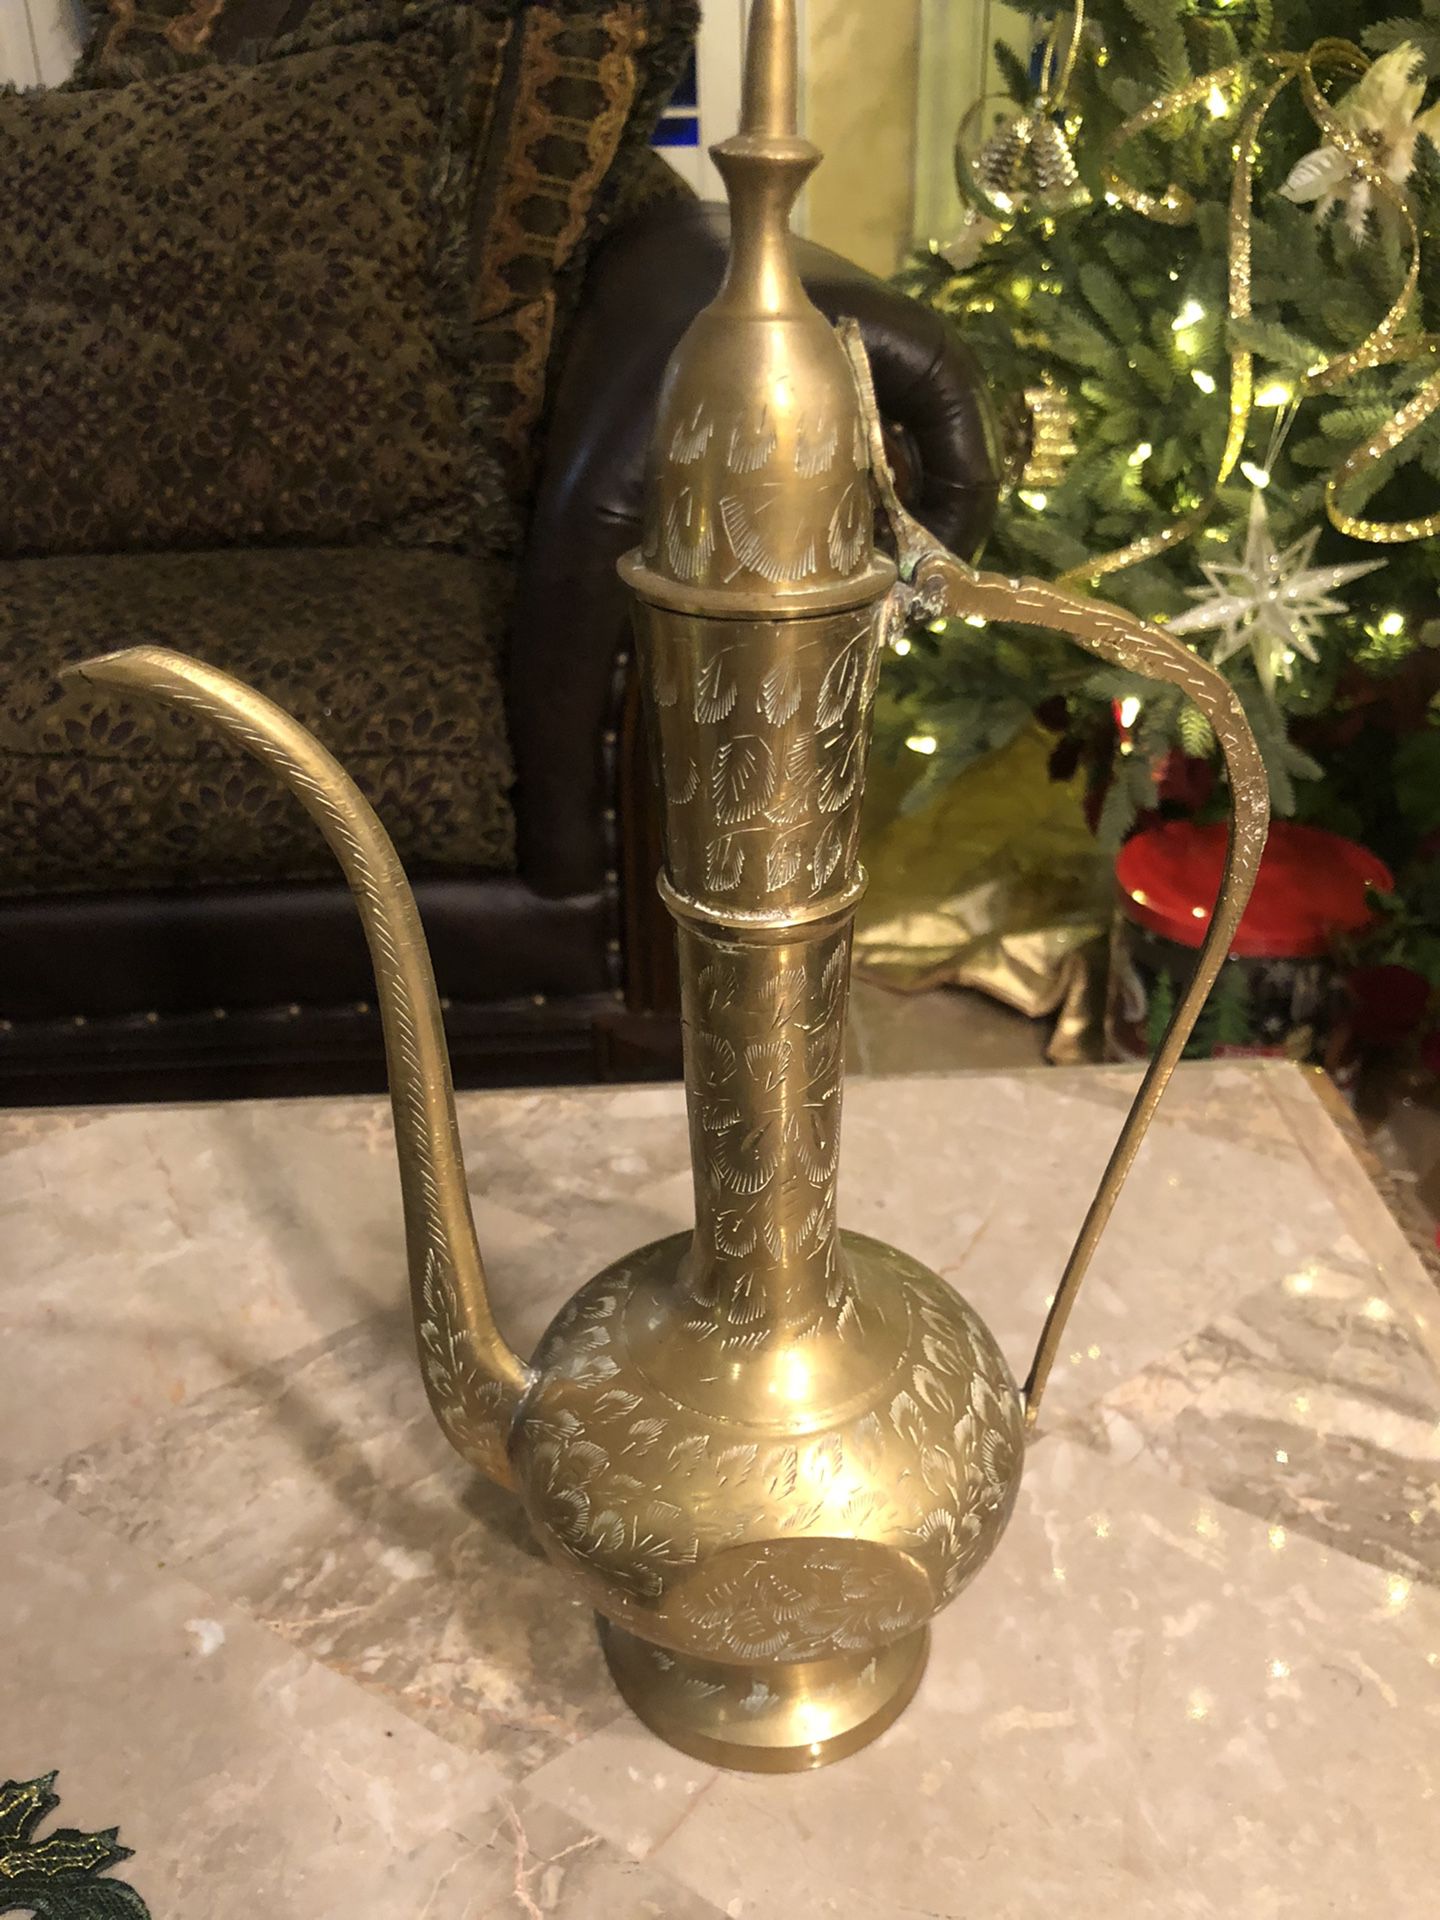 18” & 8” Tall Brass Decanters